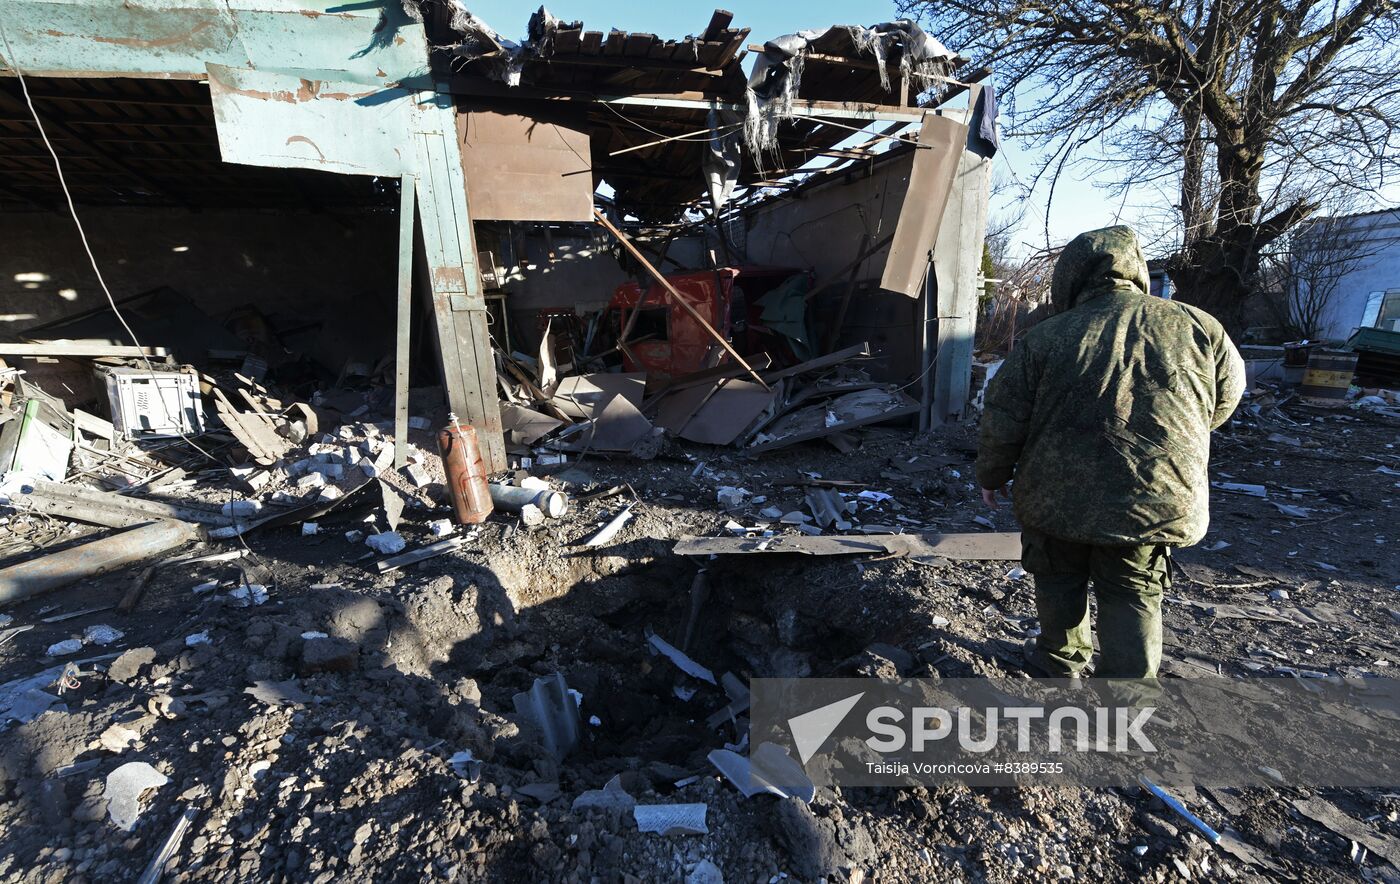 Russia Ukraine Military Operation Shelling Aftermath